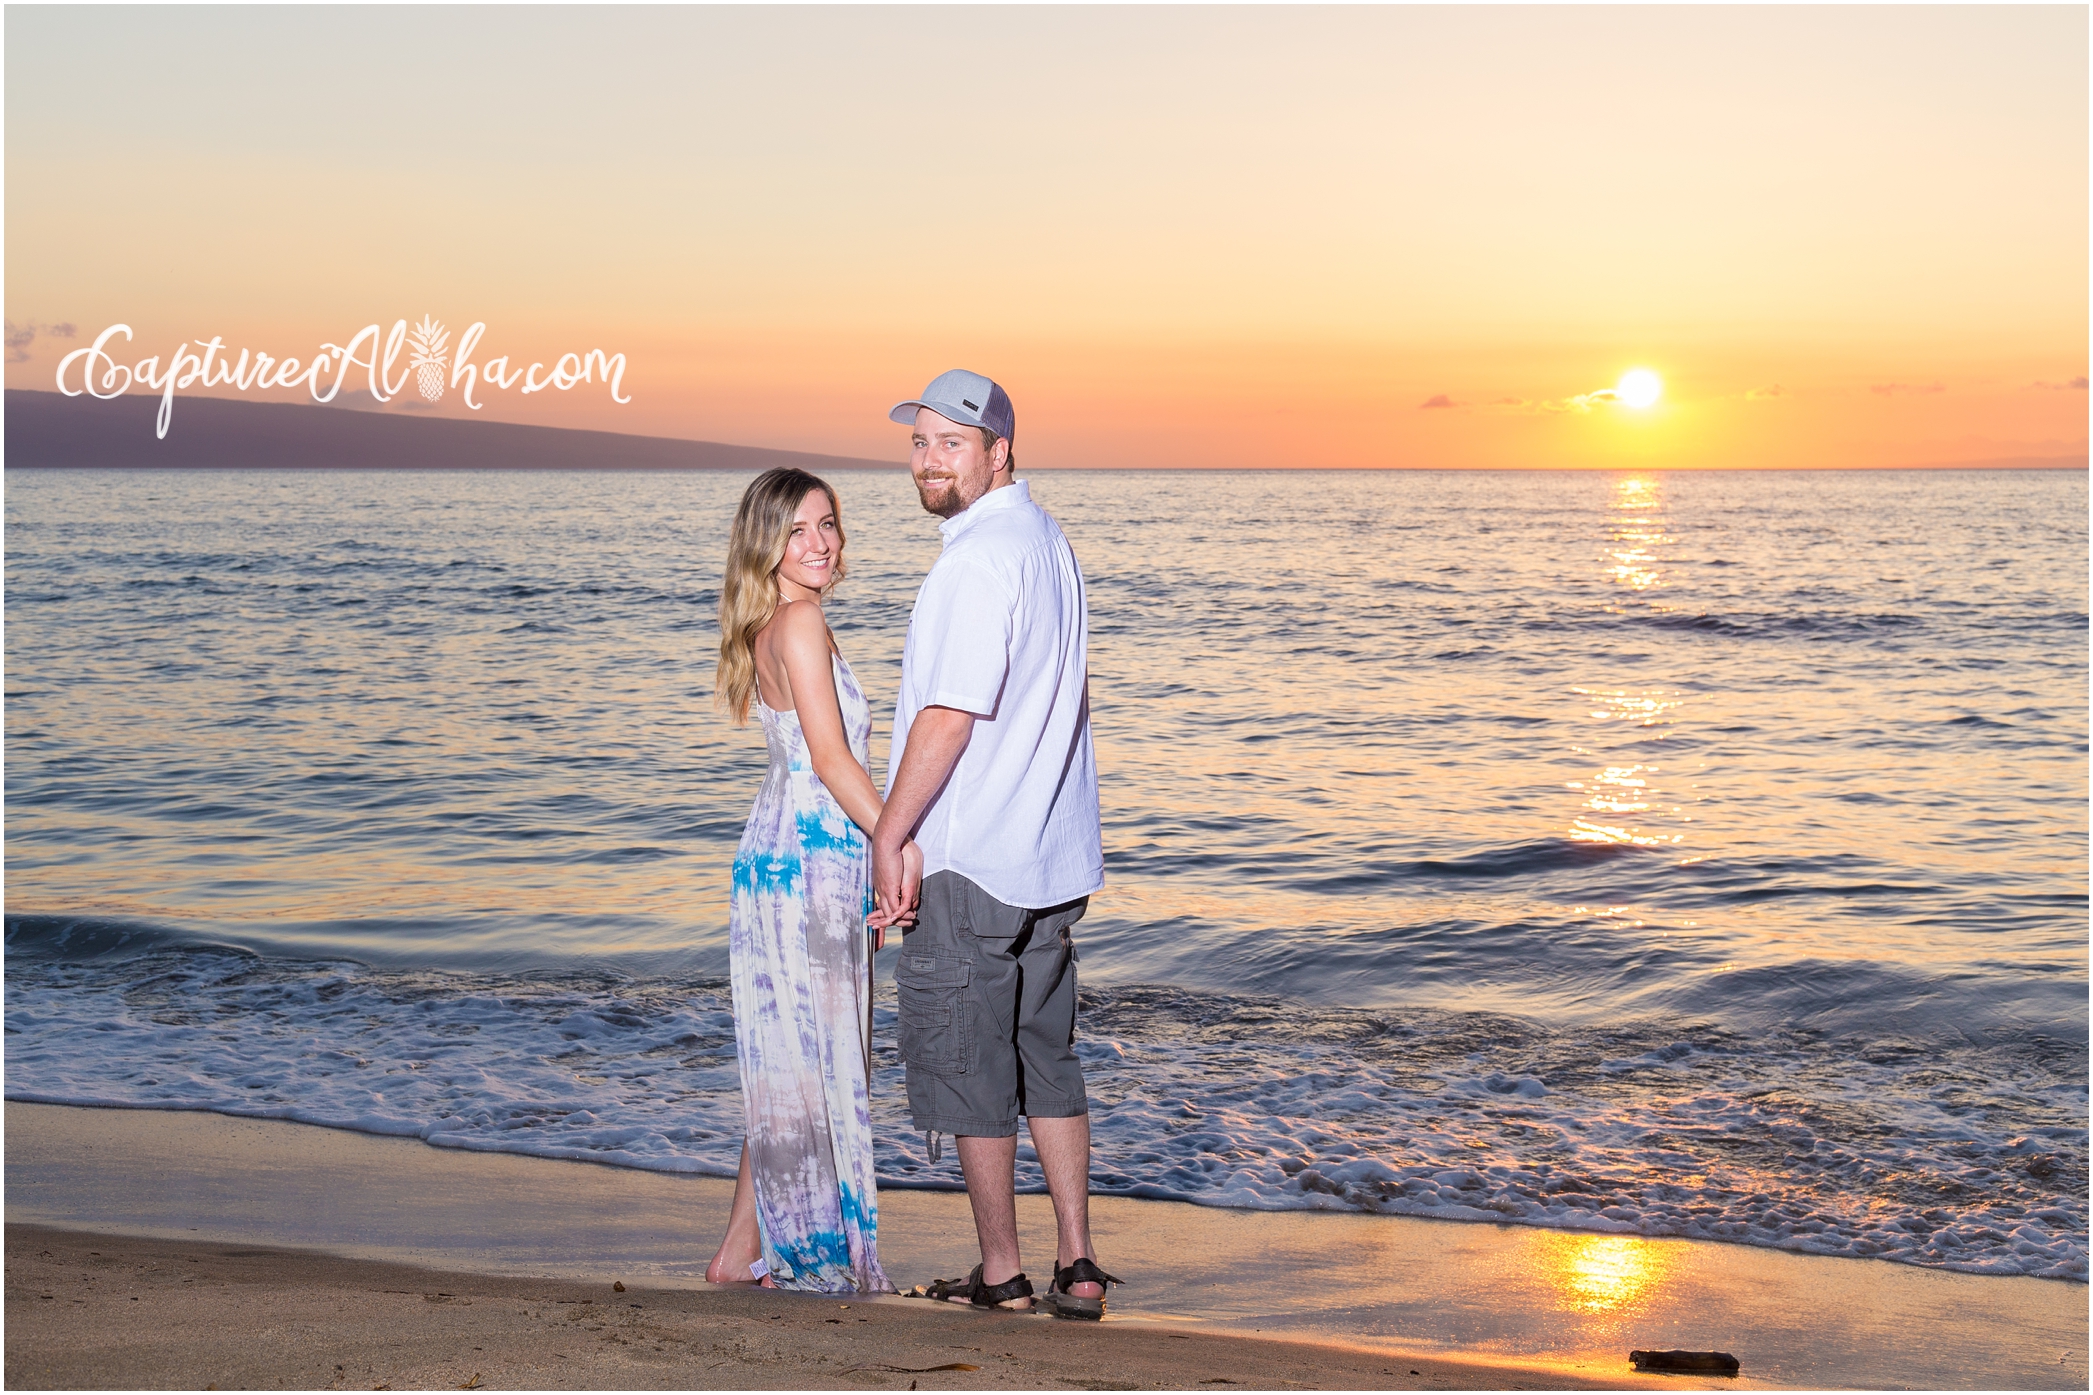 Maui Couples Photography at Baby Beach in Lahaina